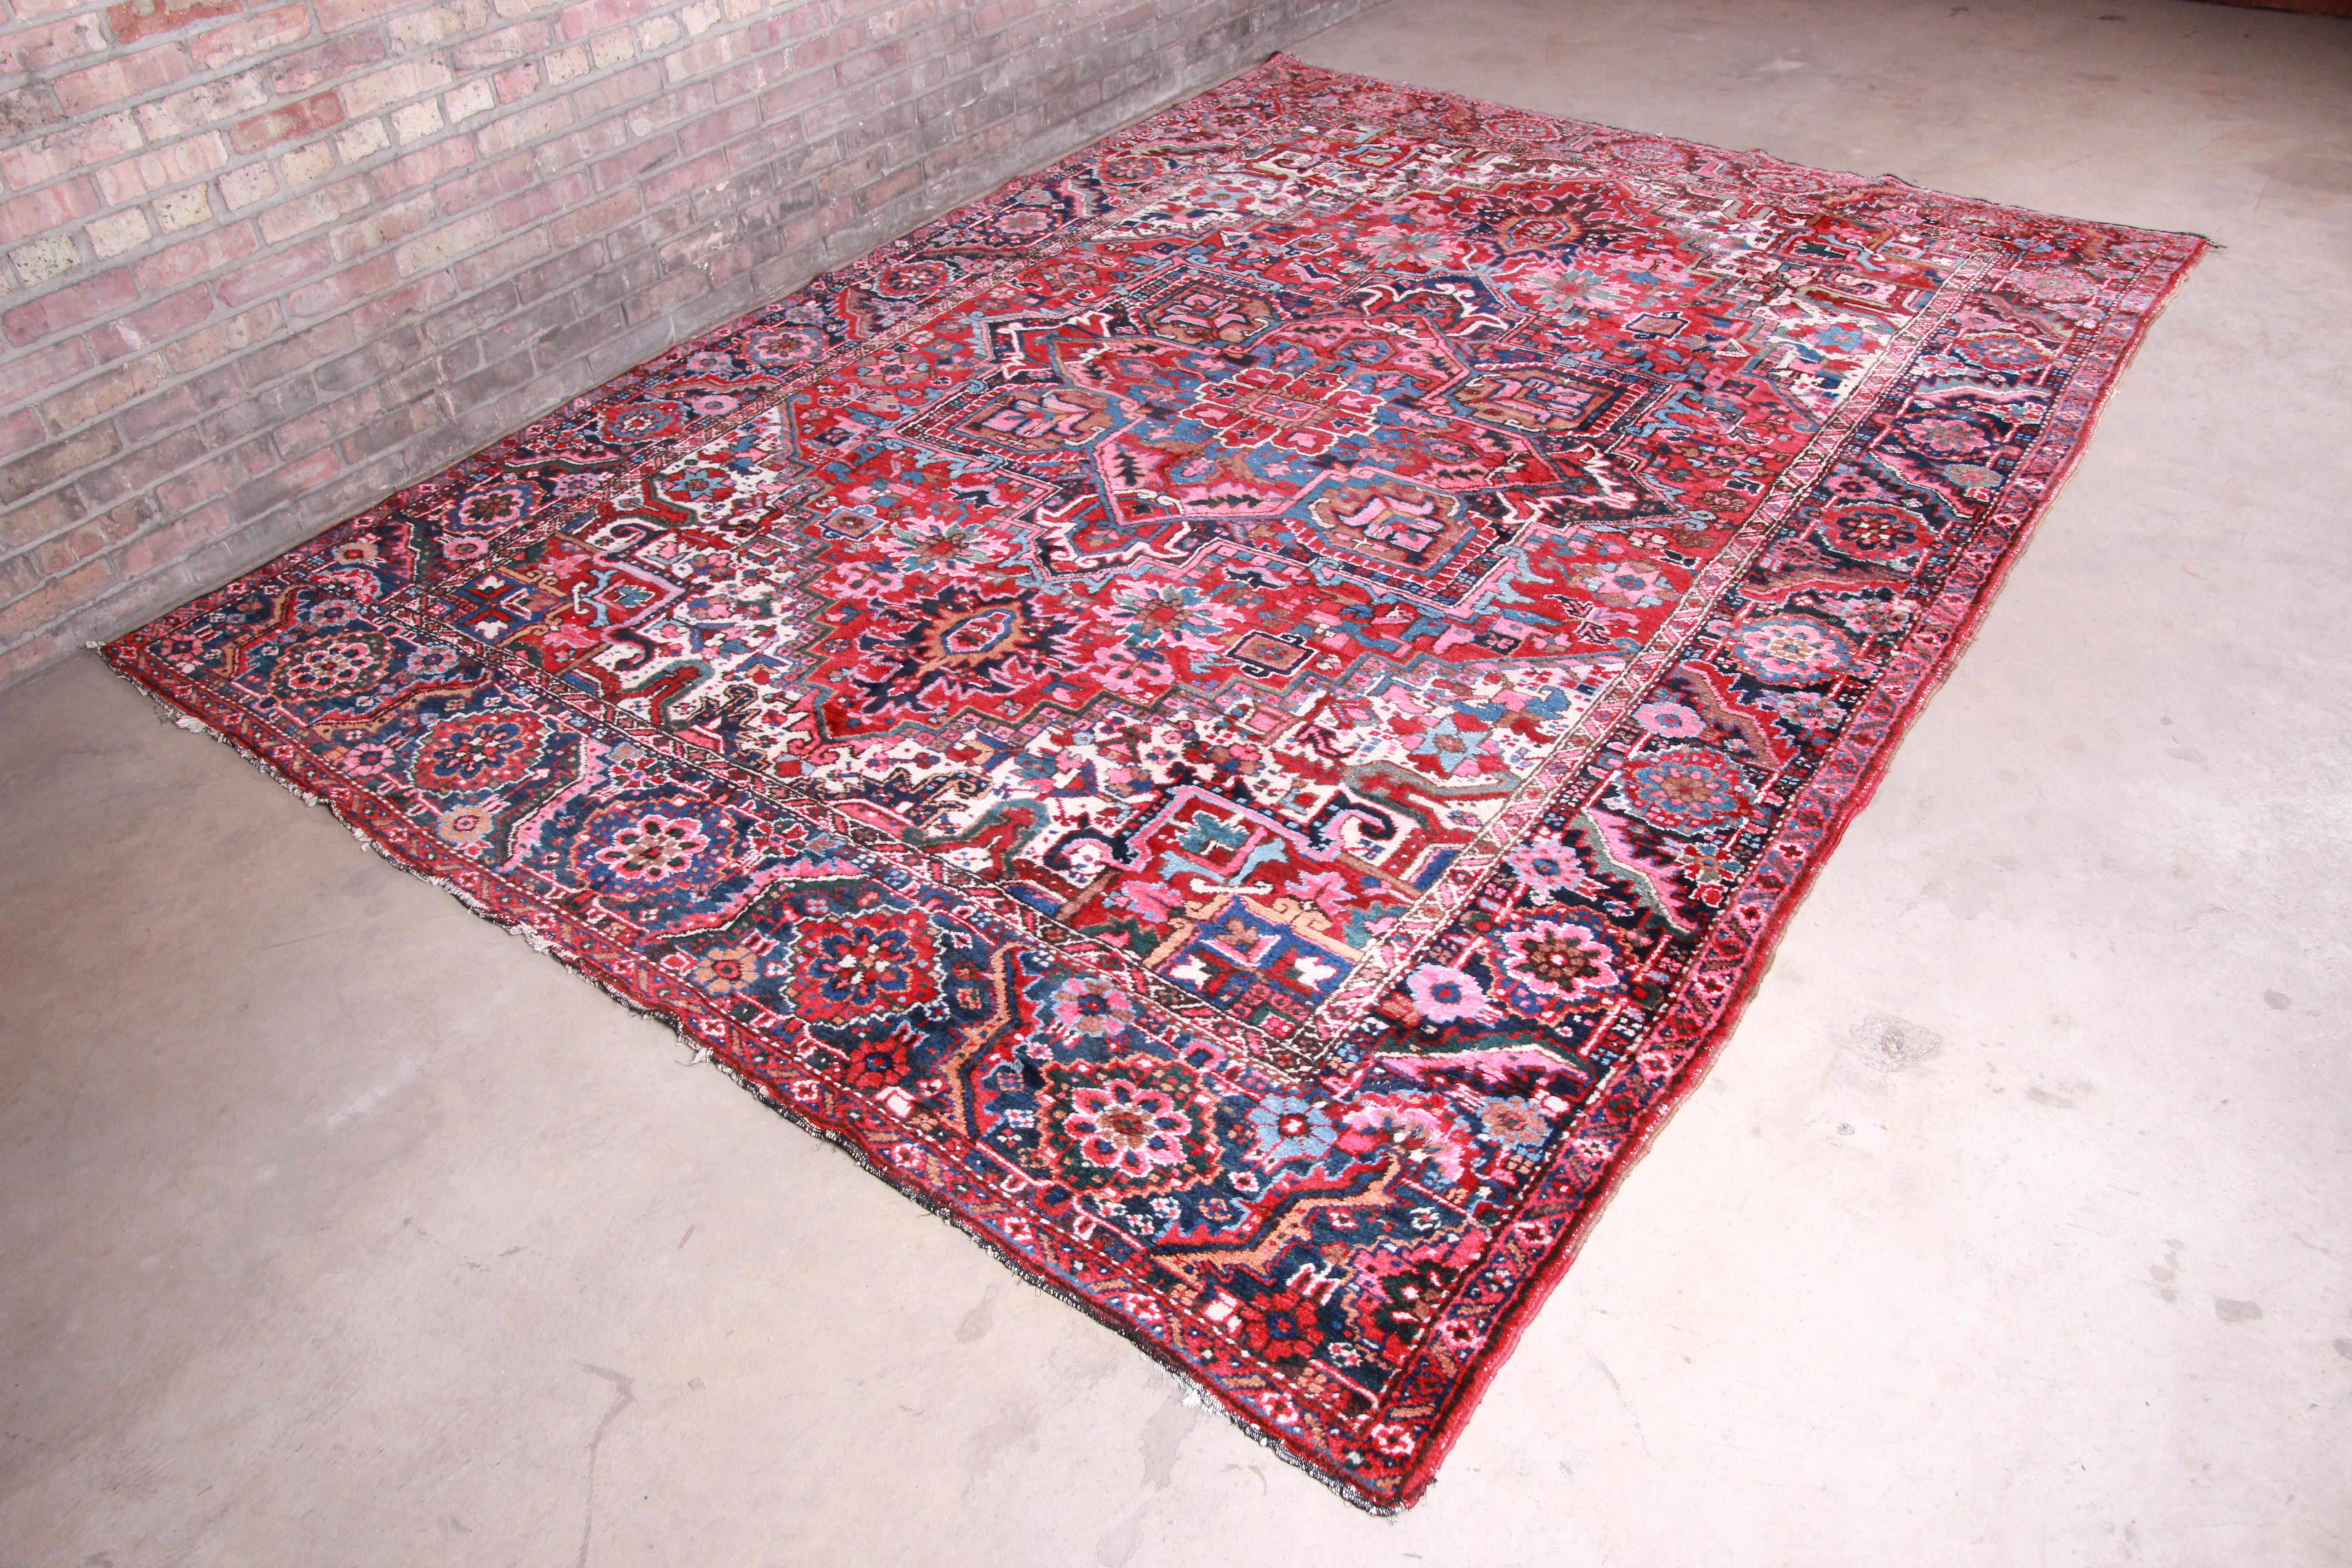 A gorgeous antique hand knotted Persian Heriz rug

circa 1940s

Classic geometric floral design, with vibrant colors.

Measures: 7